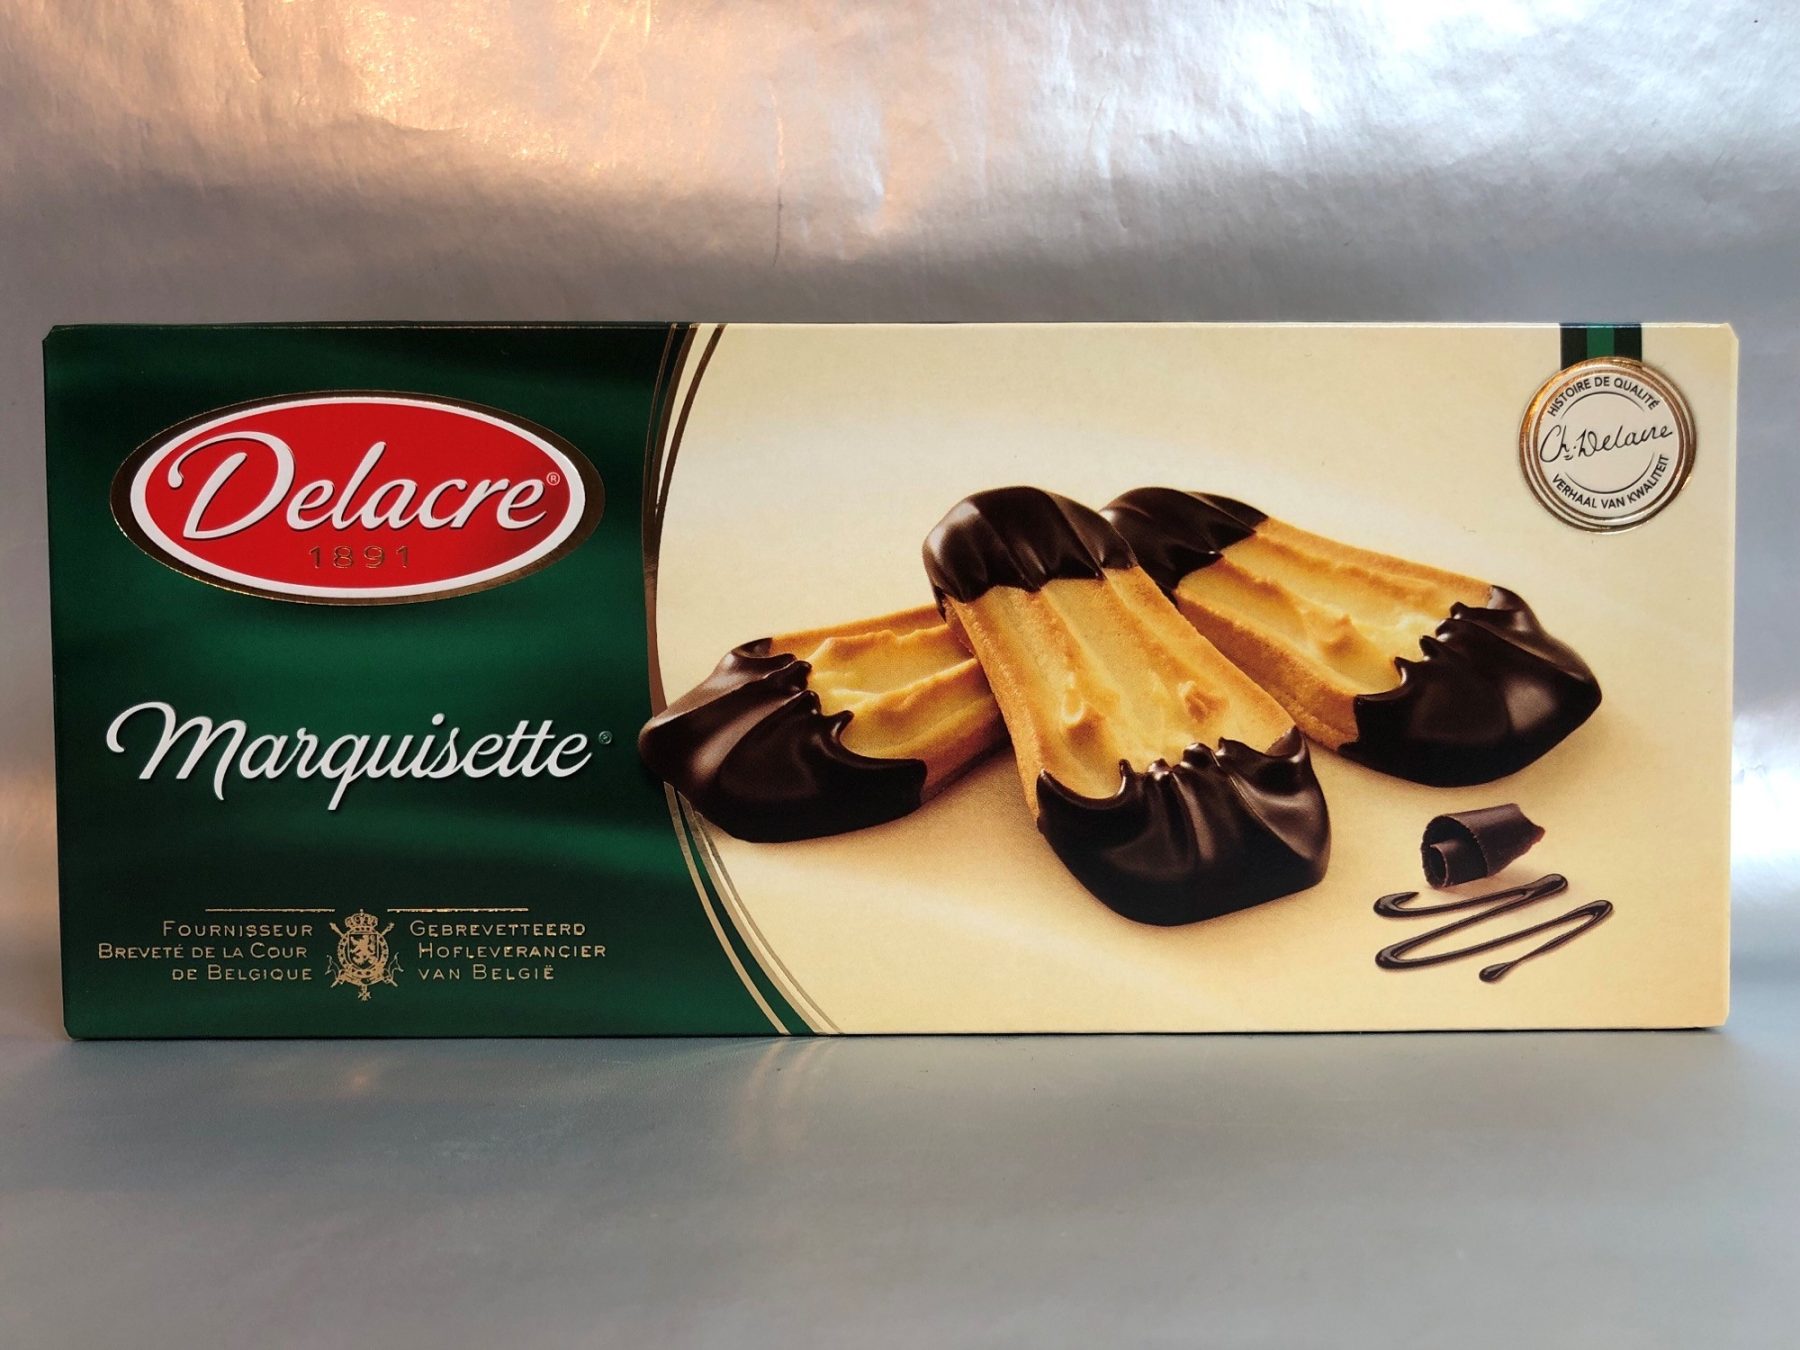 Delacre 'Marquisette' biscuits